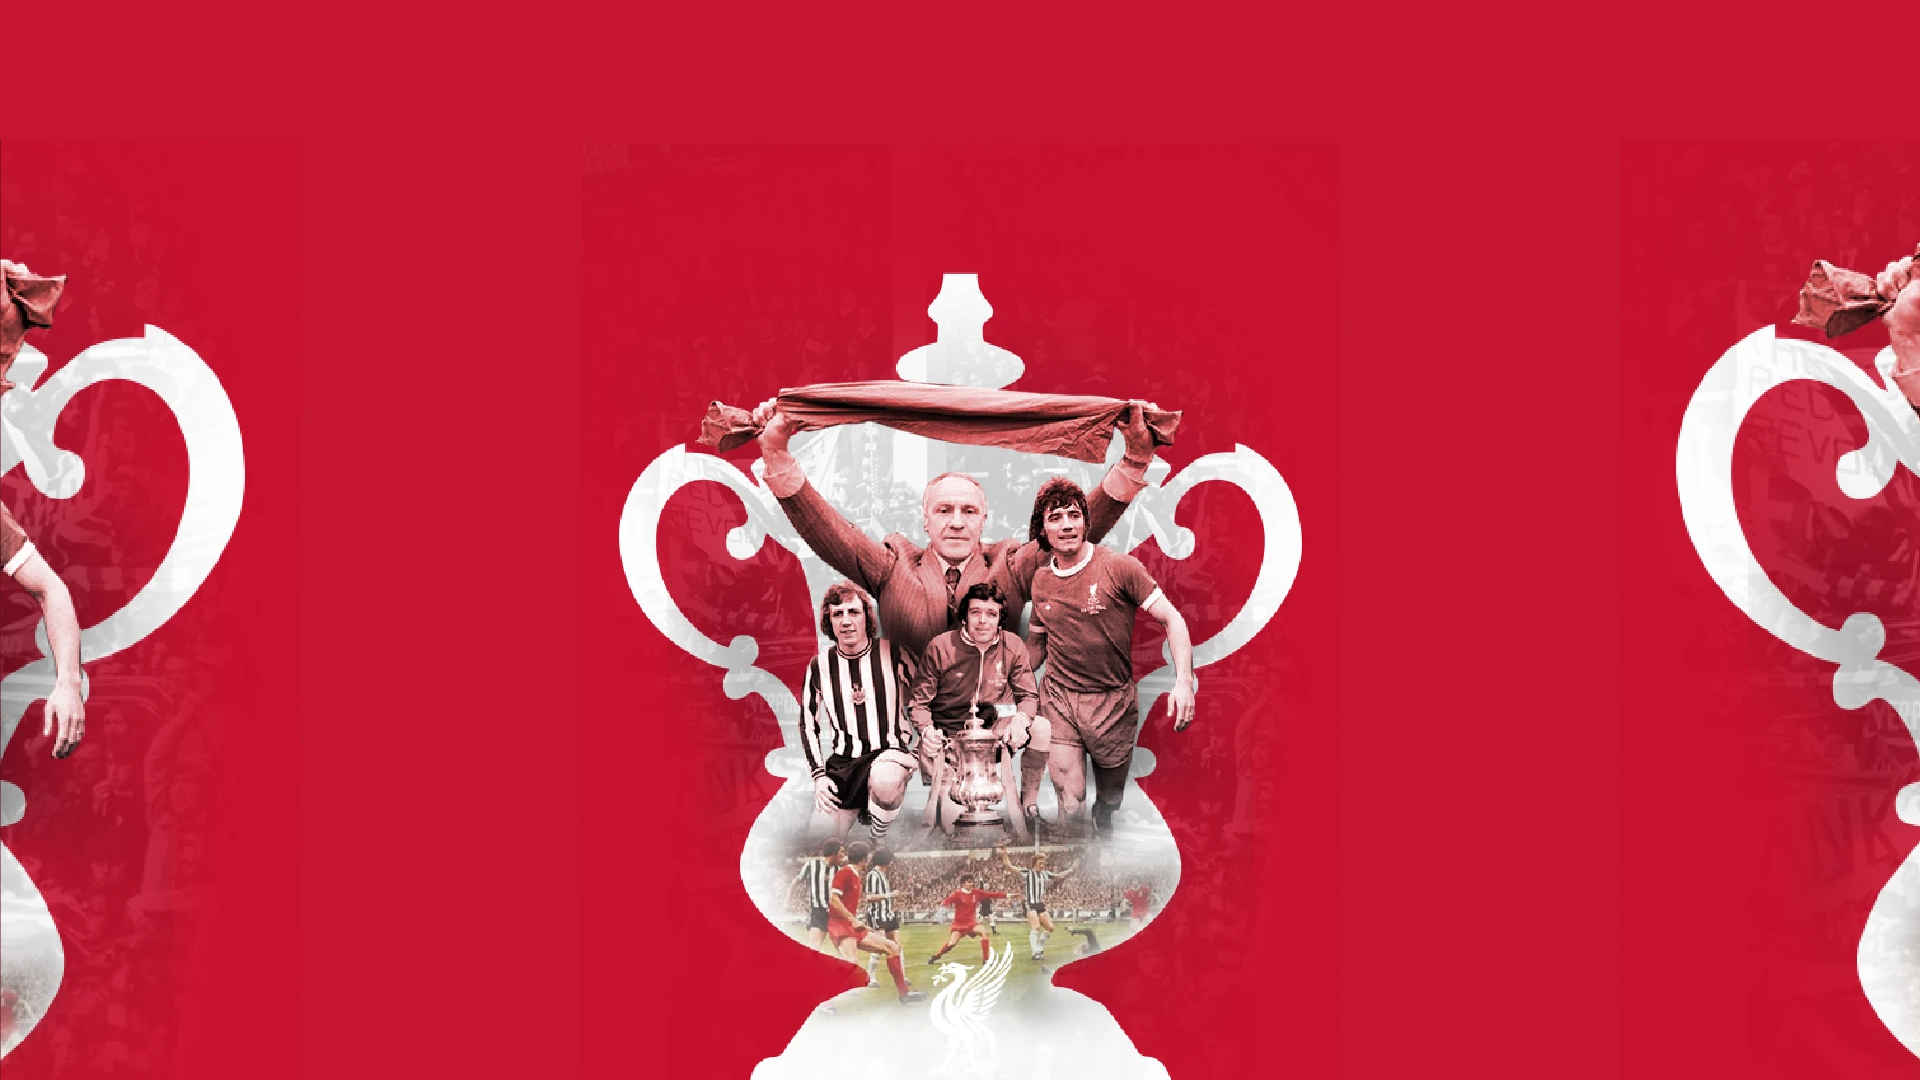 Bill Shankly's FA Cup Farewell